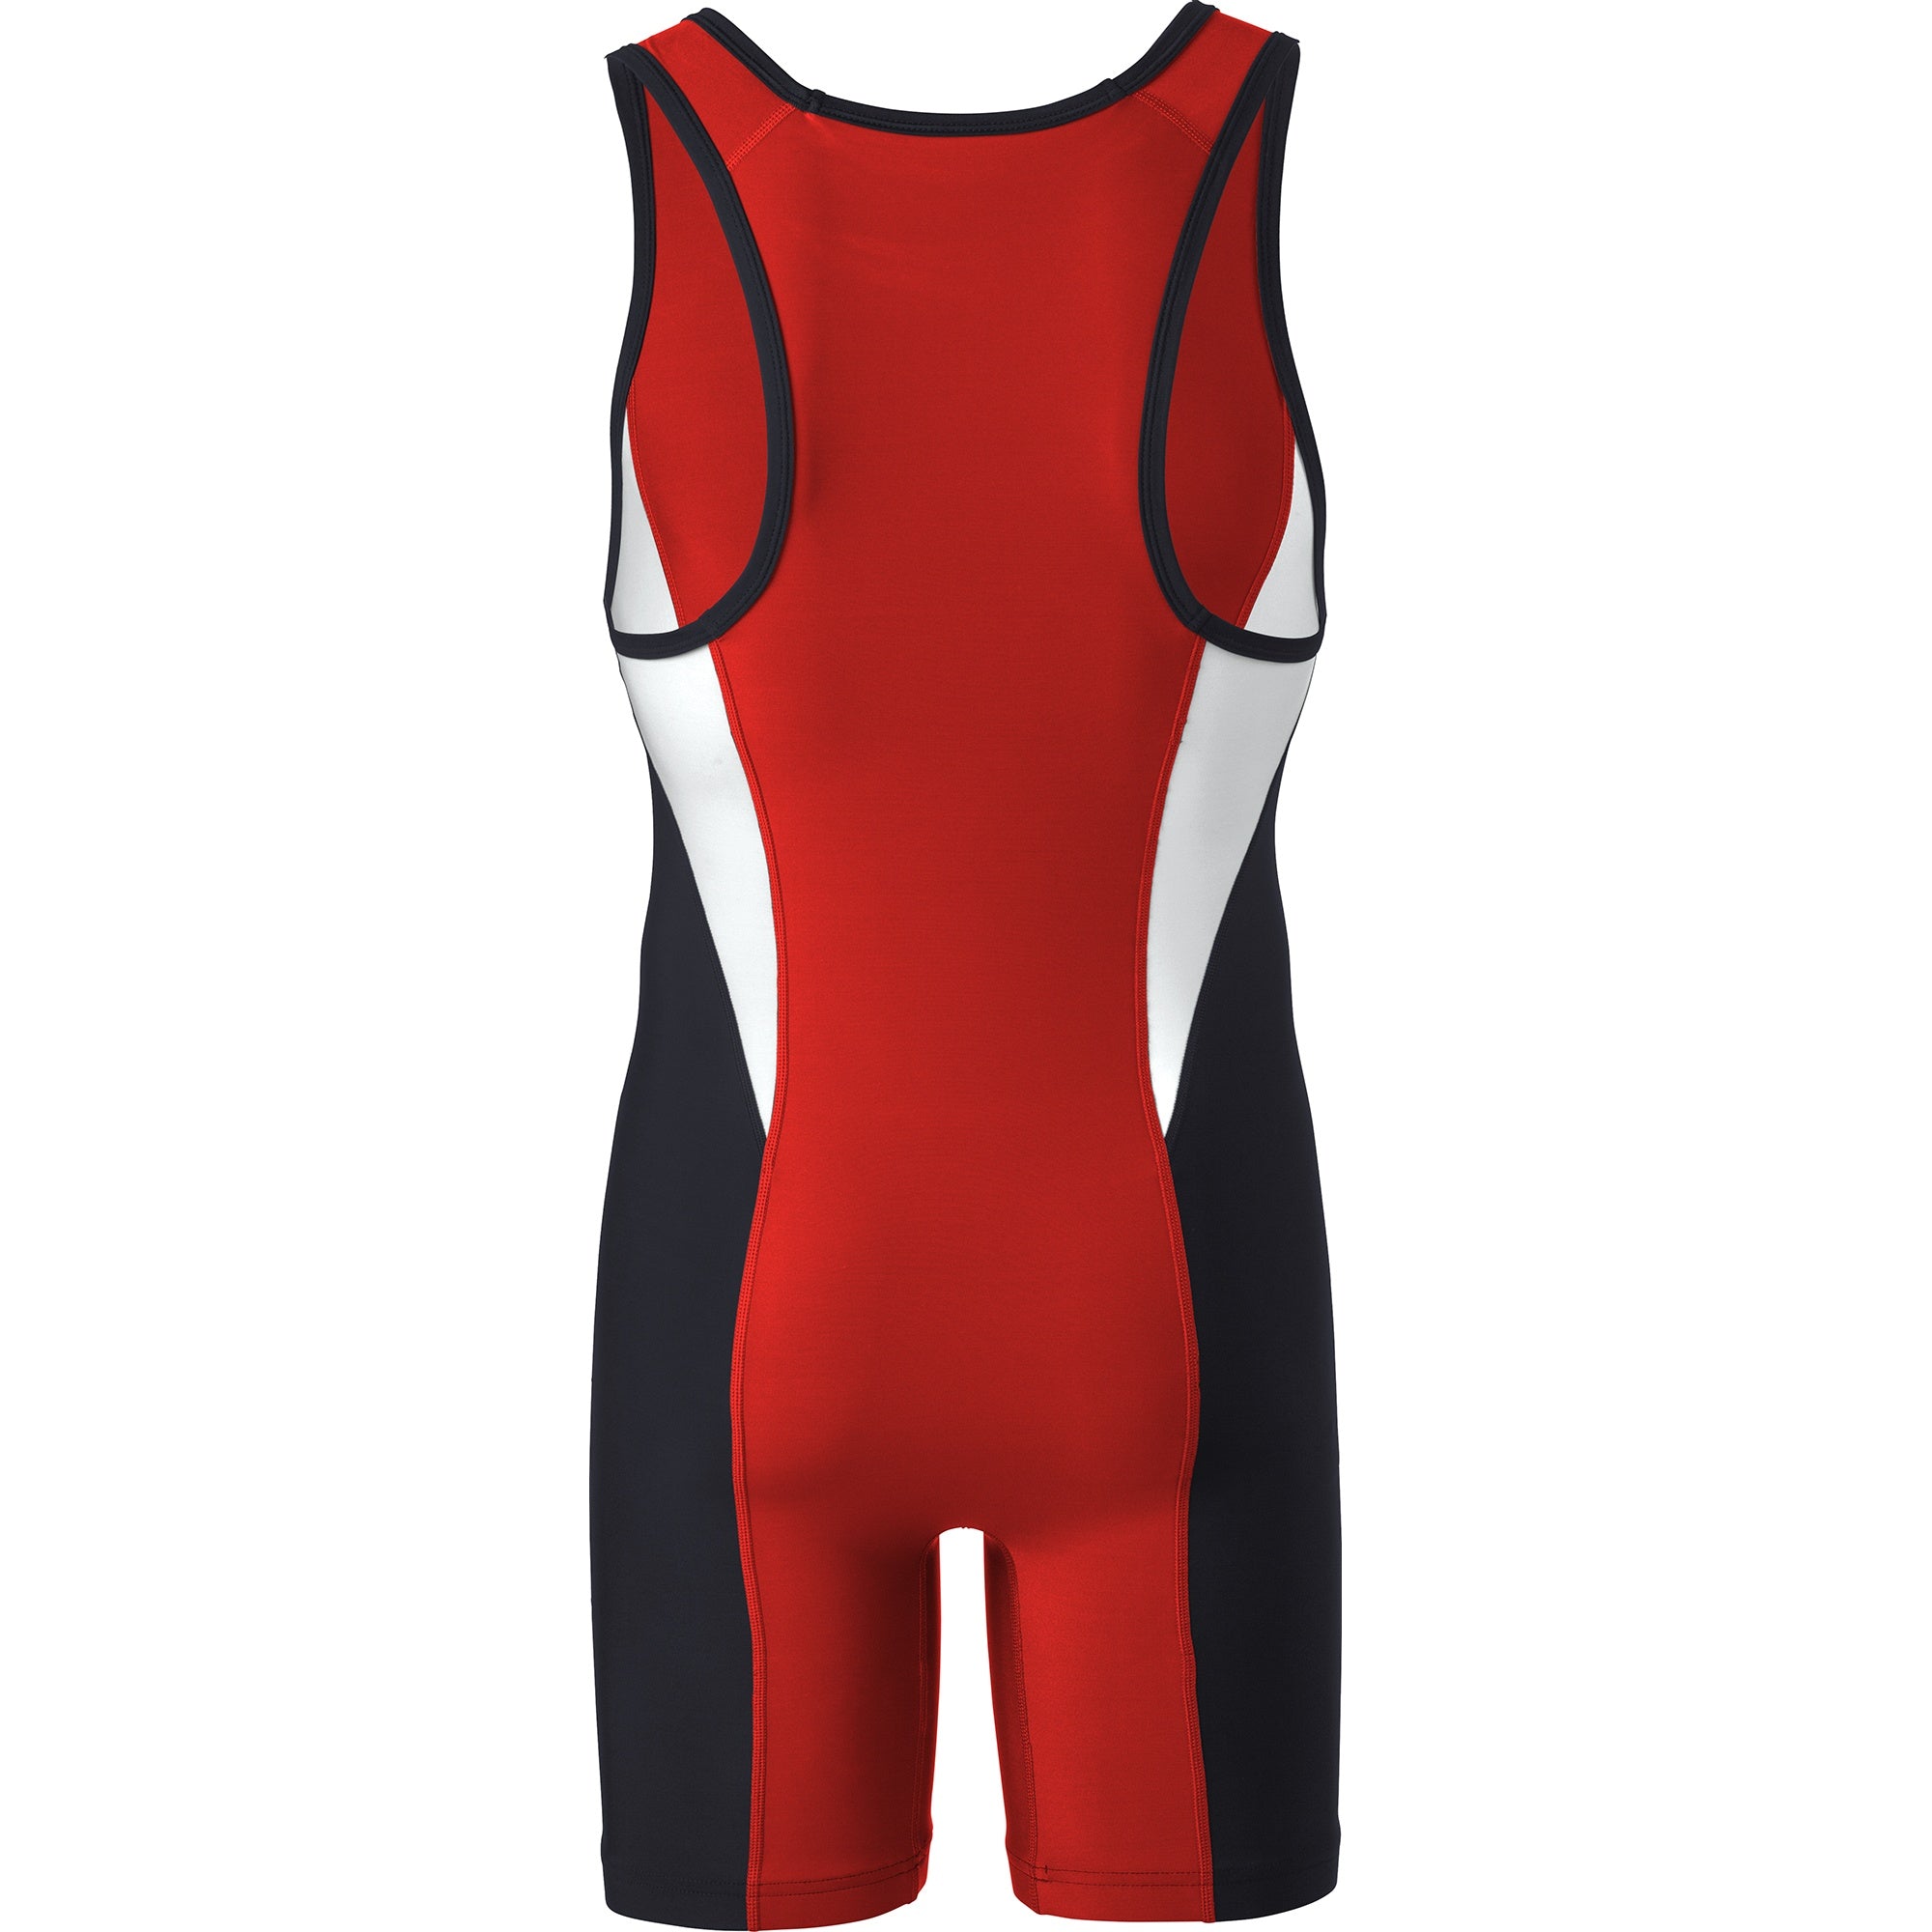 ASICS Singlet | Multiple Colors Available –